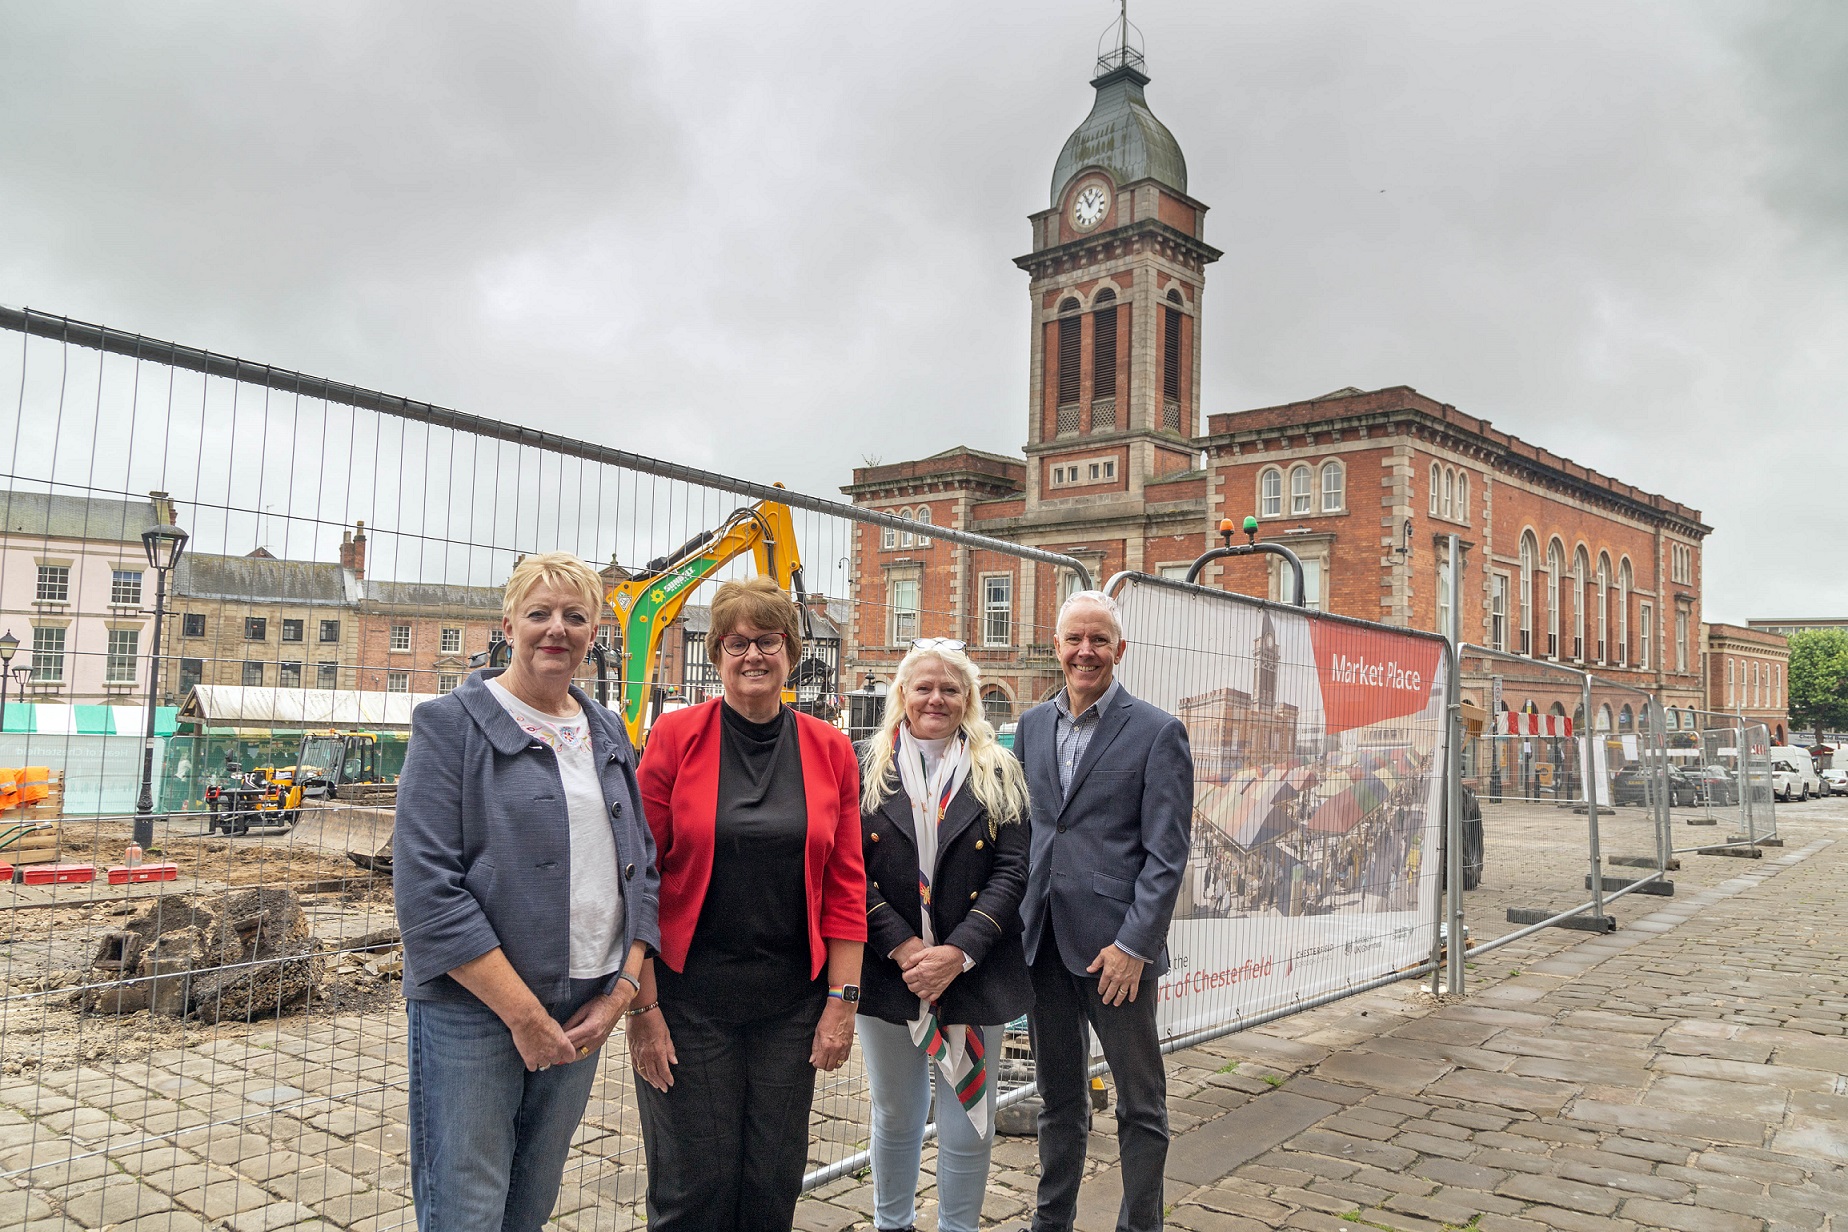 Town centre regeneration work starts on site in Chesterfield